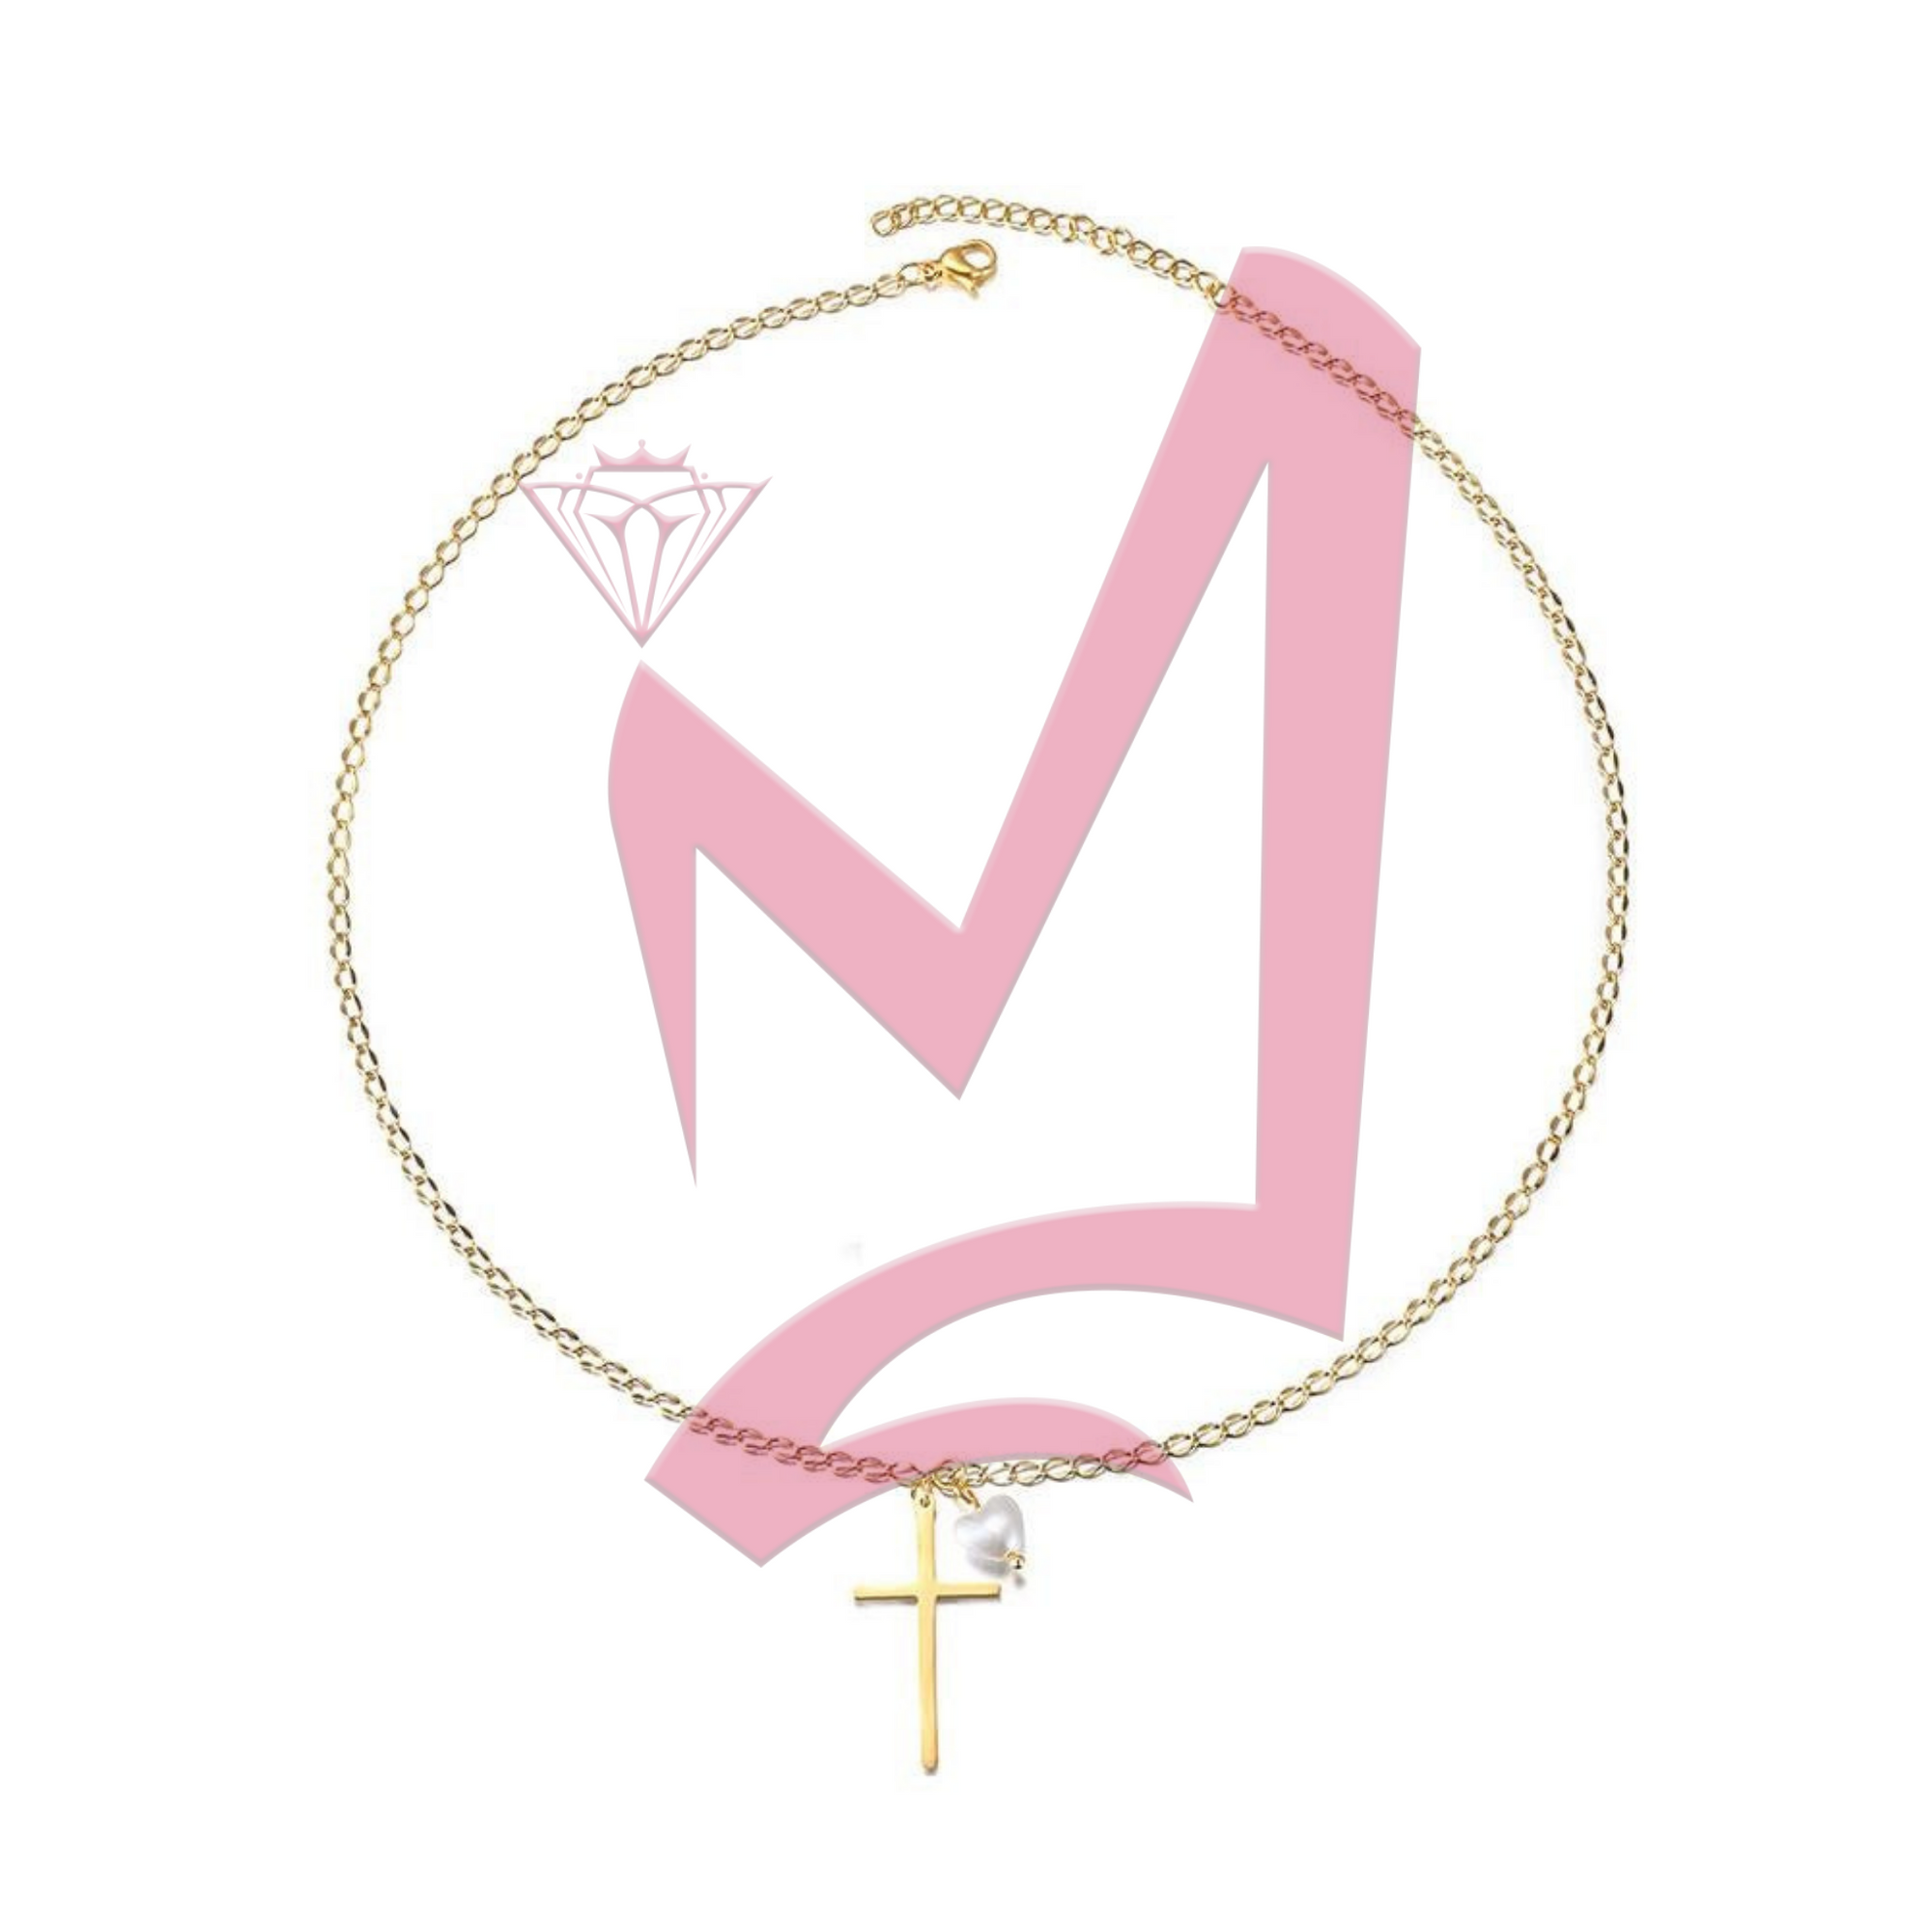 Cross with Love-shaped Pearl Pendant in 14K Plated Gold Necklace